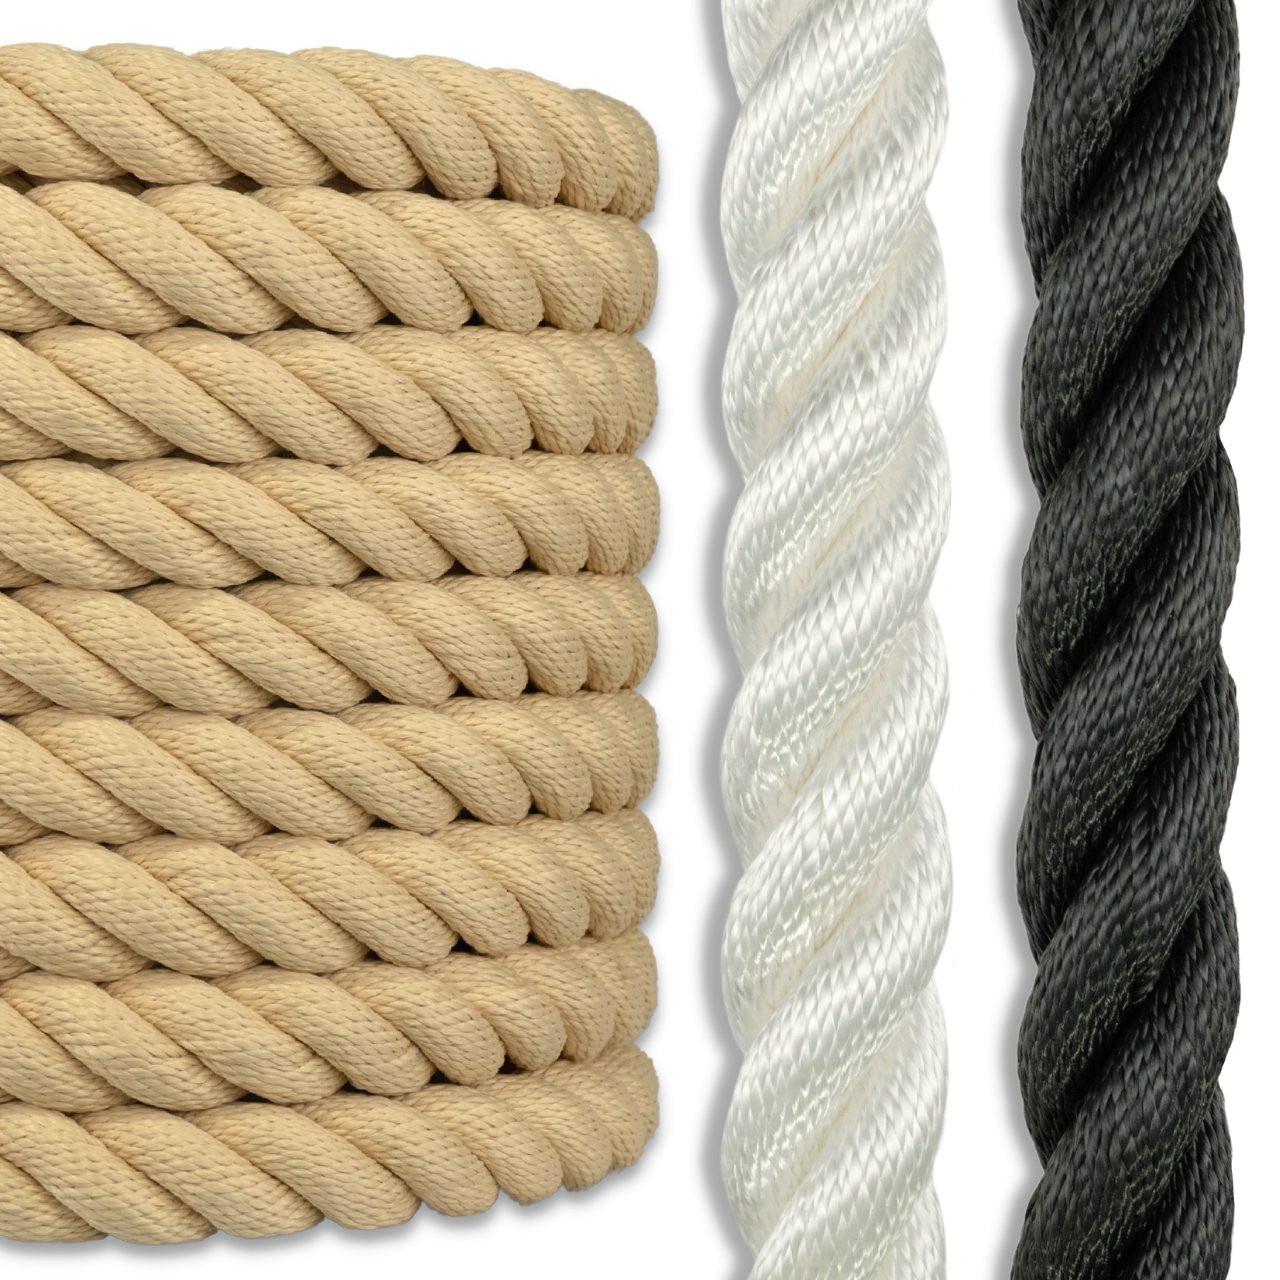 SINYLOO Twisted Black Polyester Rope 3/8 inch x 100 feet - Heavy